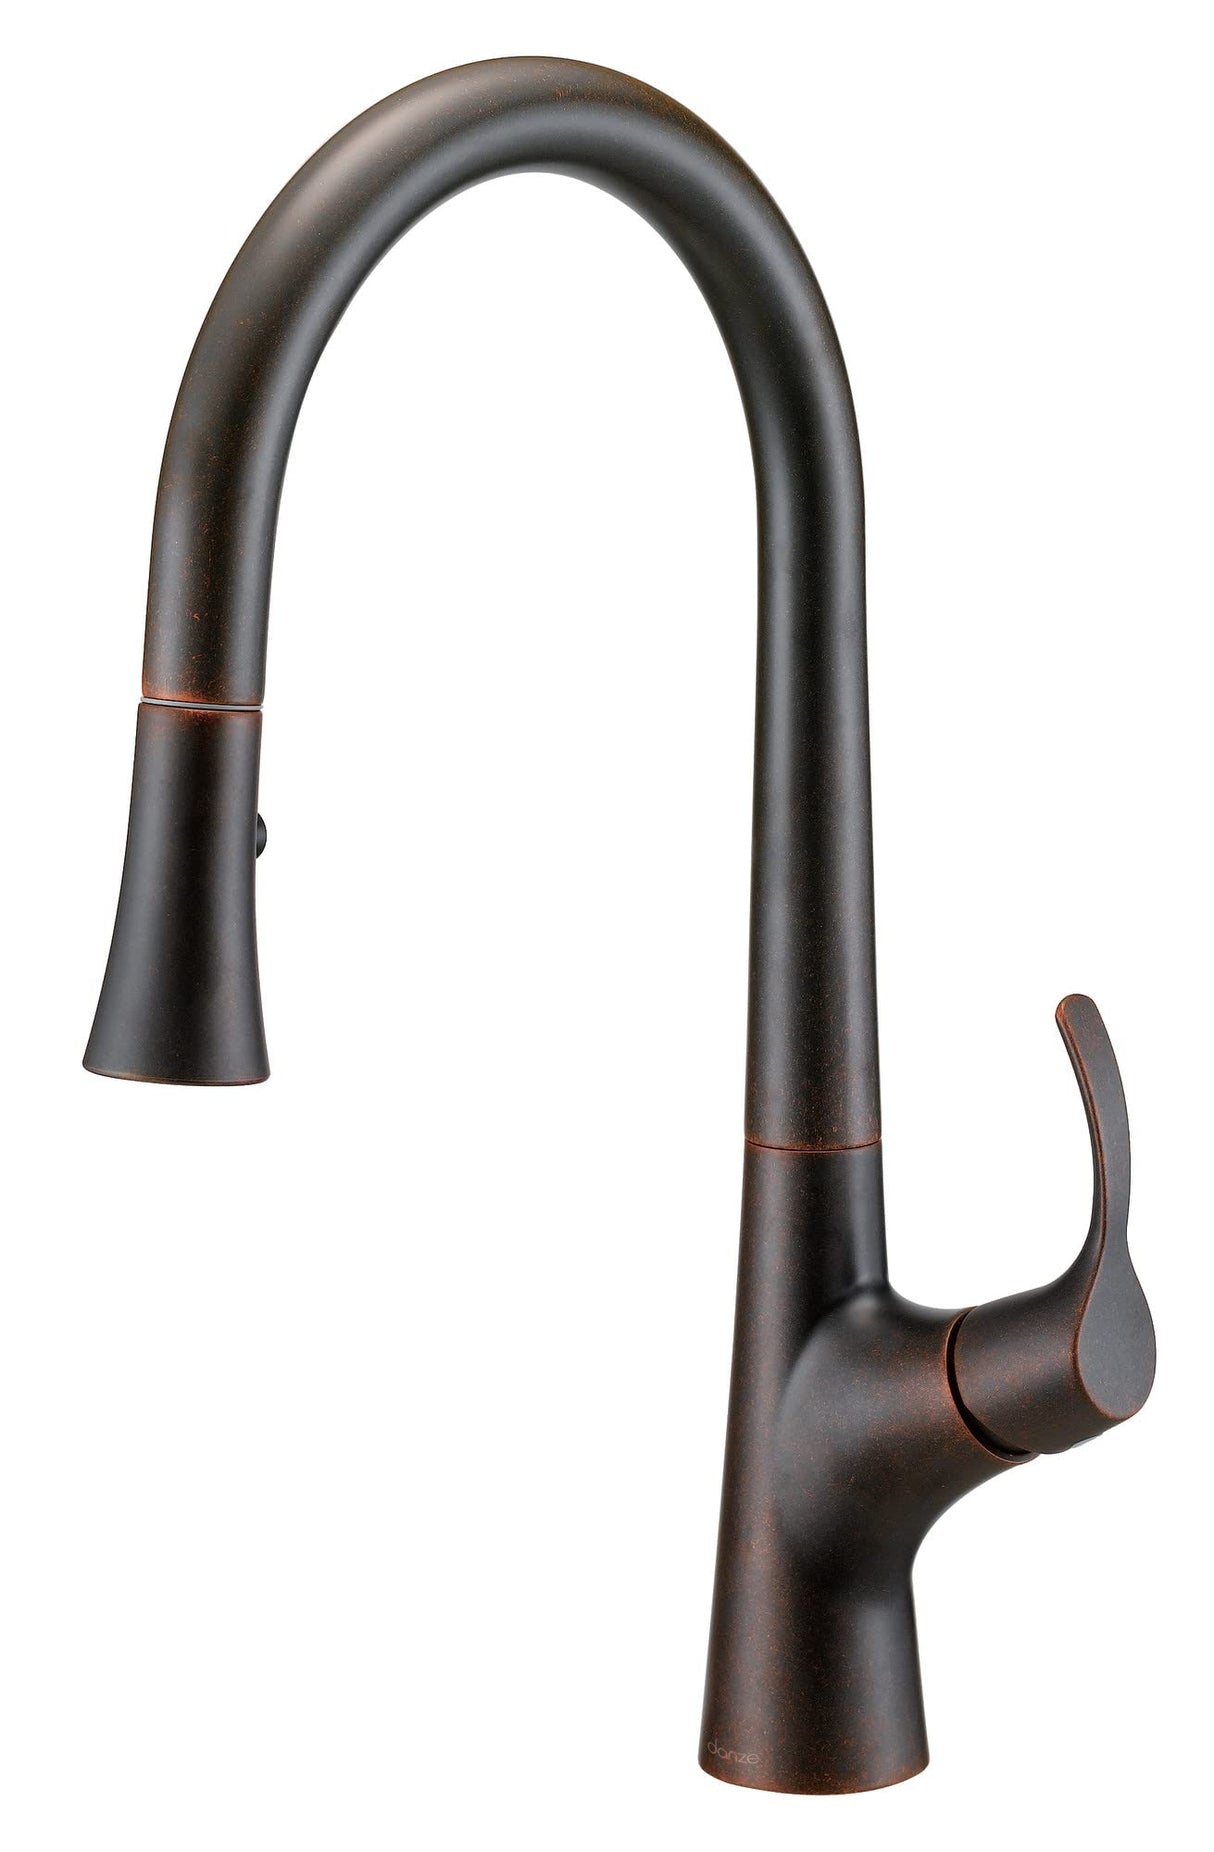 Gerber D454422BR Antioch Single Handle Pull-down Kitchen Faucet - Tumbled Bronze